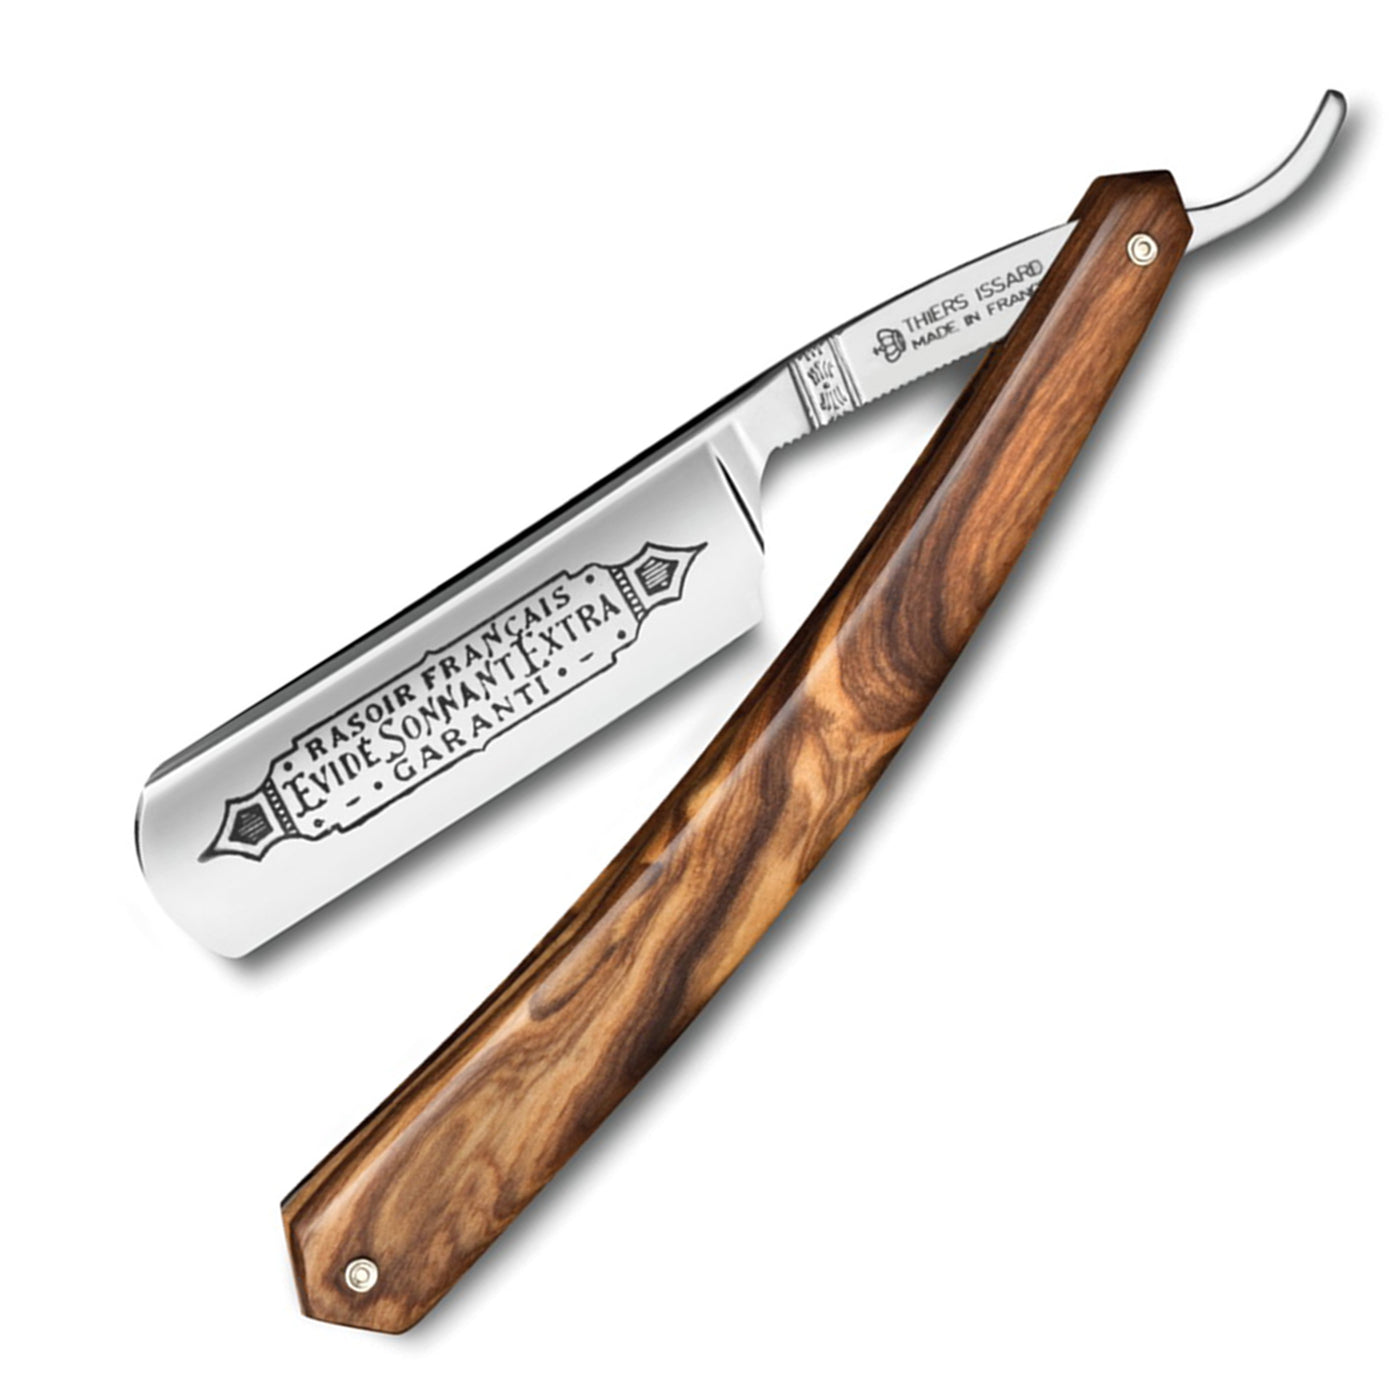 Thiers Issard 1196 Evide Sonnant 6/8" Olivewood Straight Razor